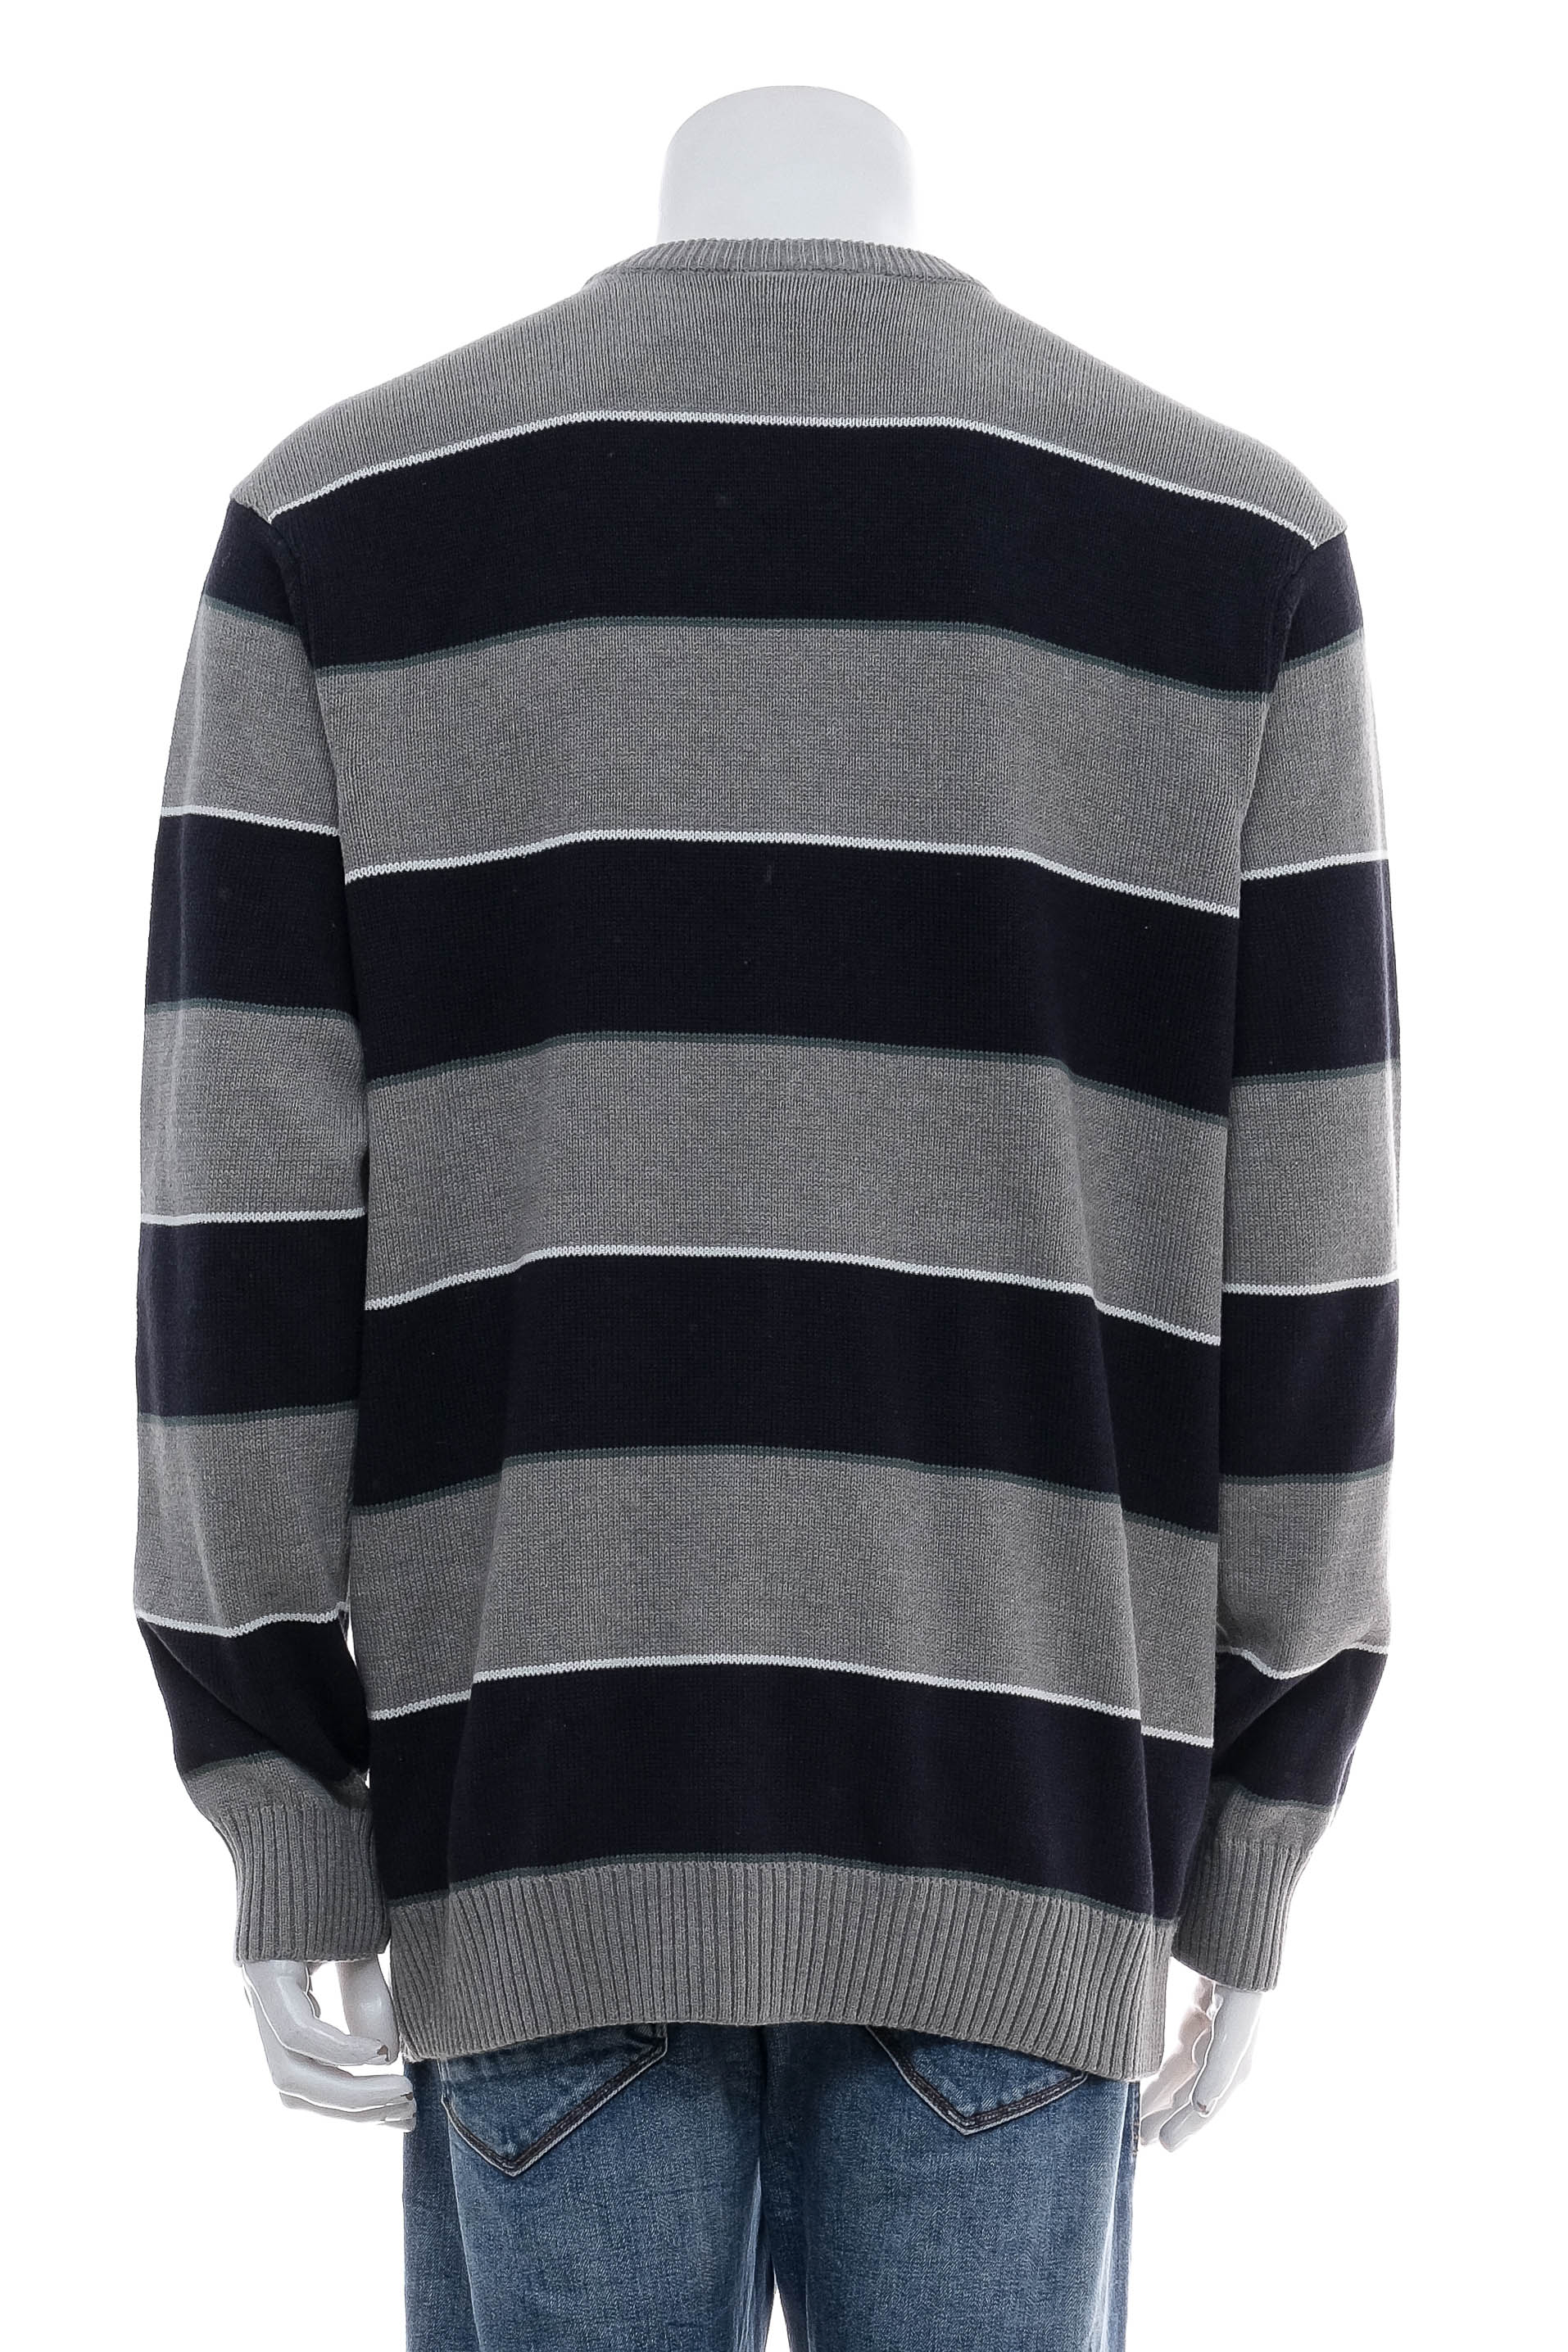 Men's sweater - Grey Connection - 1